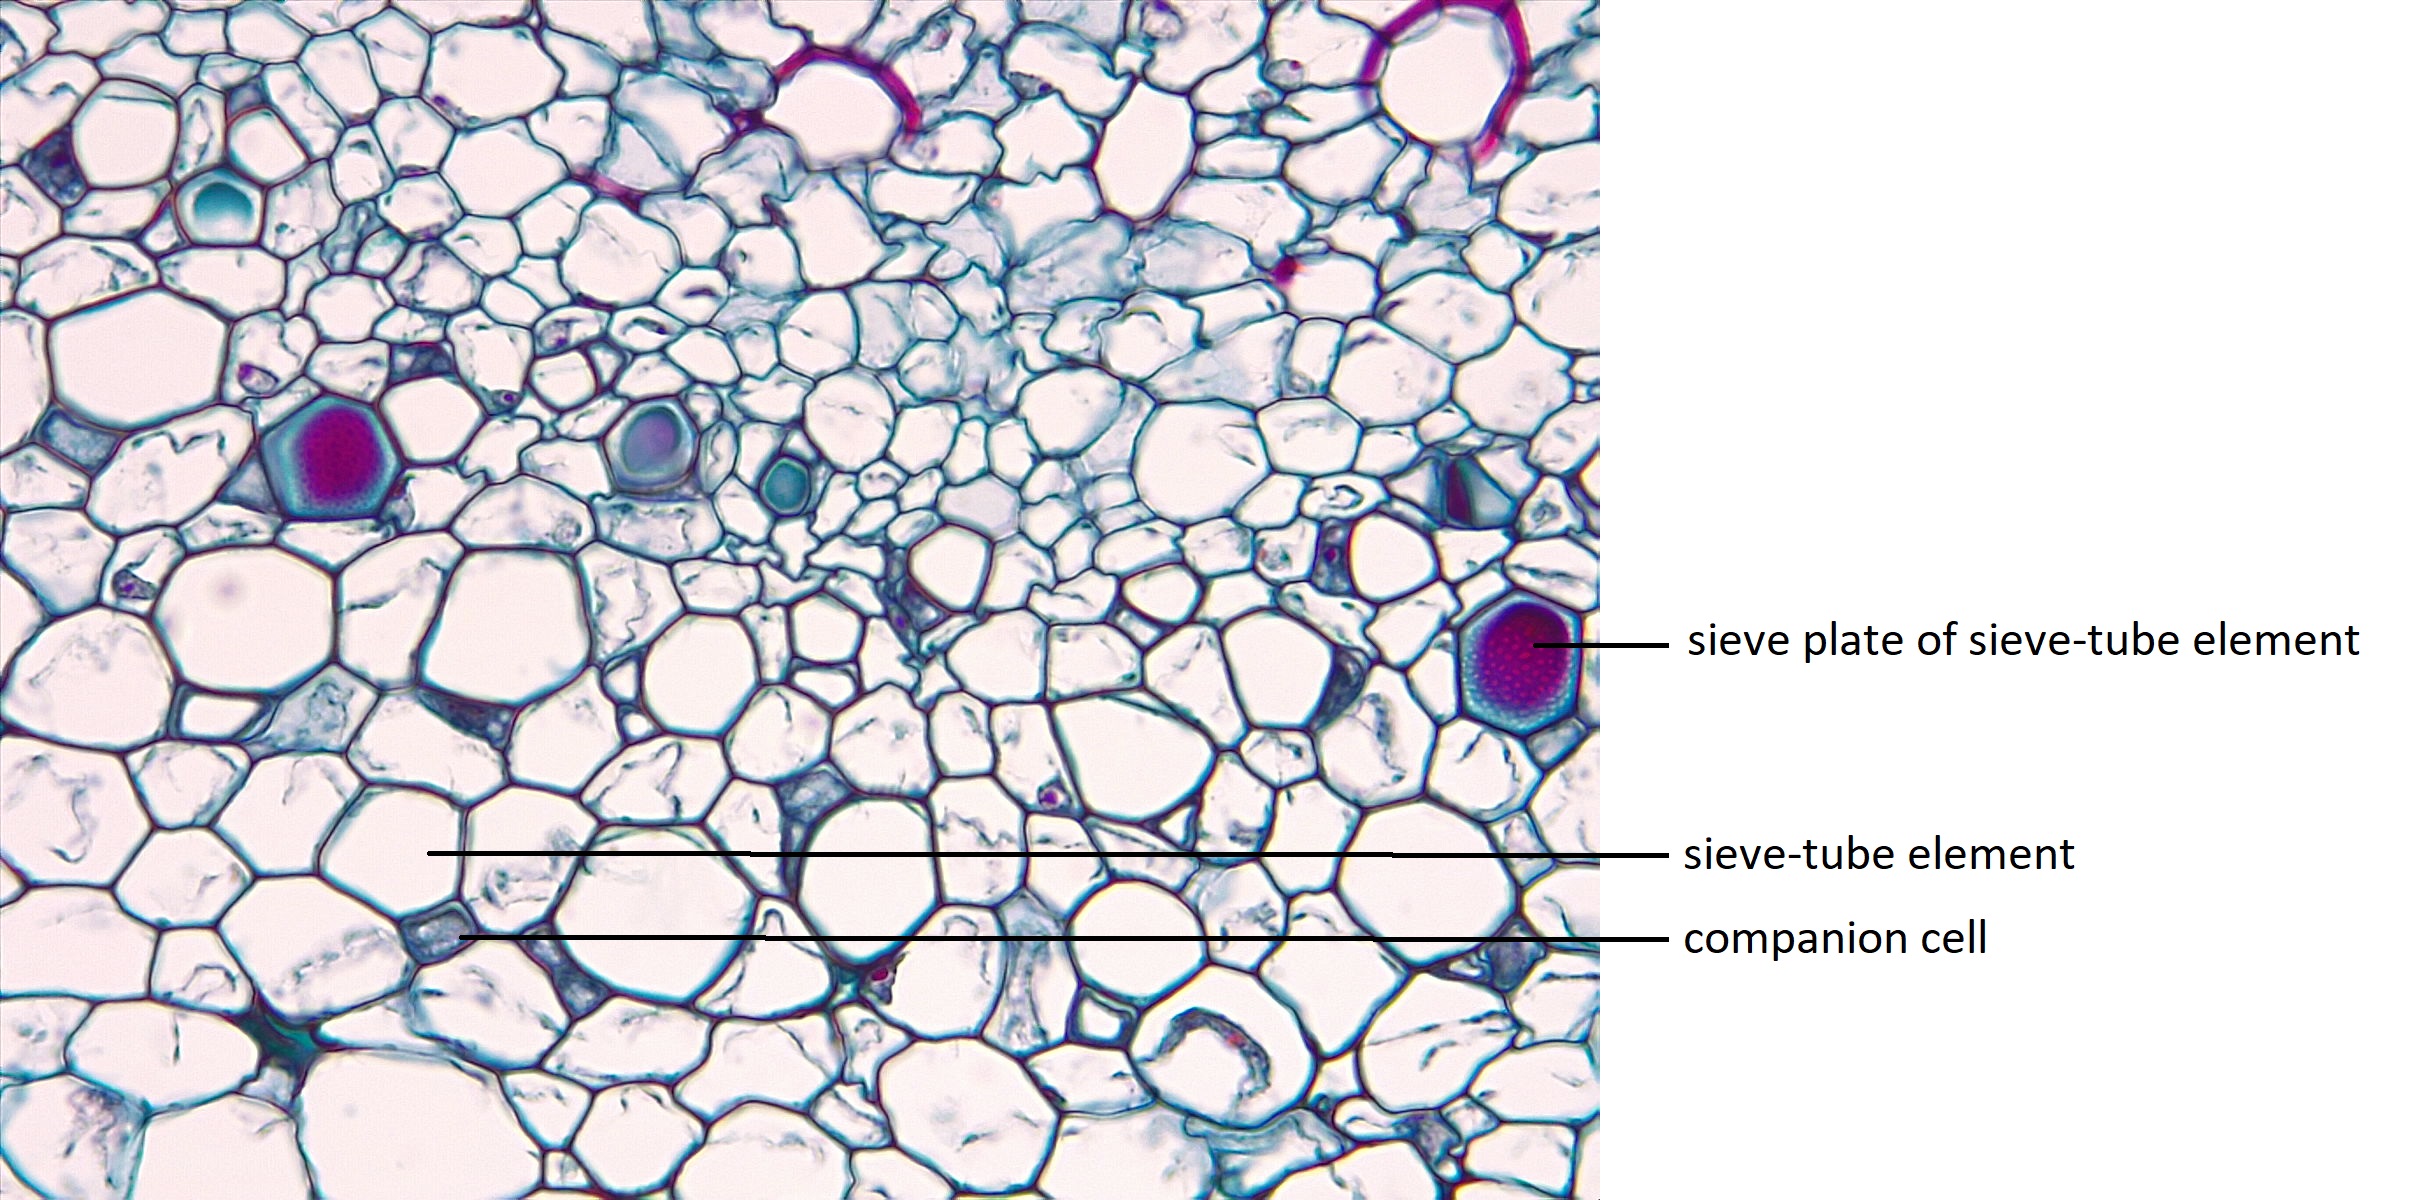 Cucurbita stem cross section showing the cells of the phloem, including wide sieve-tube elements, and small, dark companion cells.